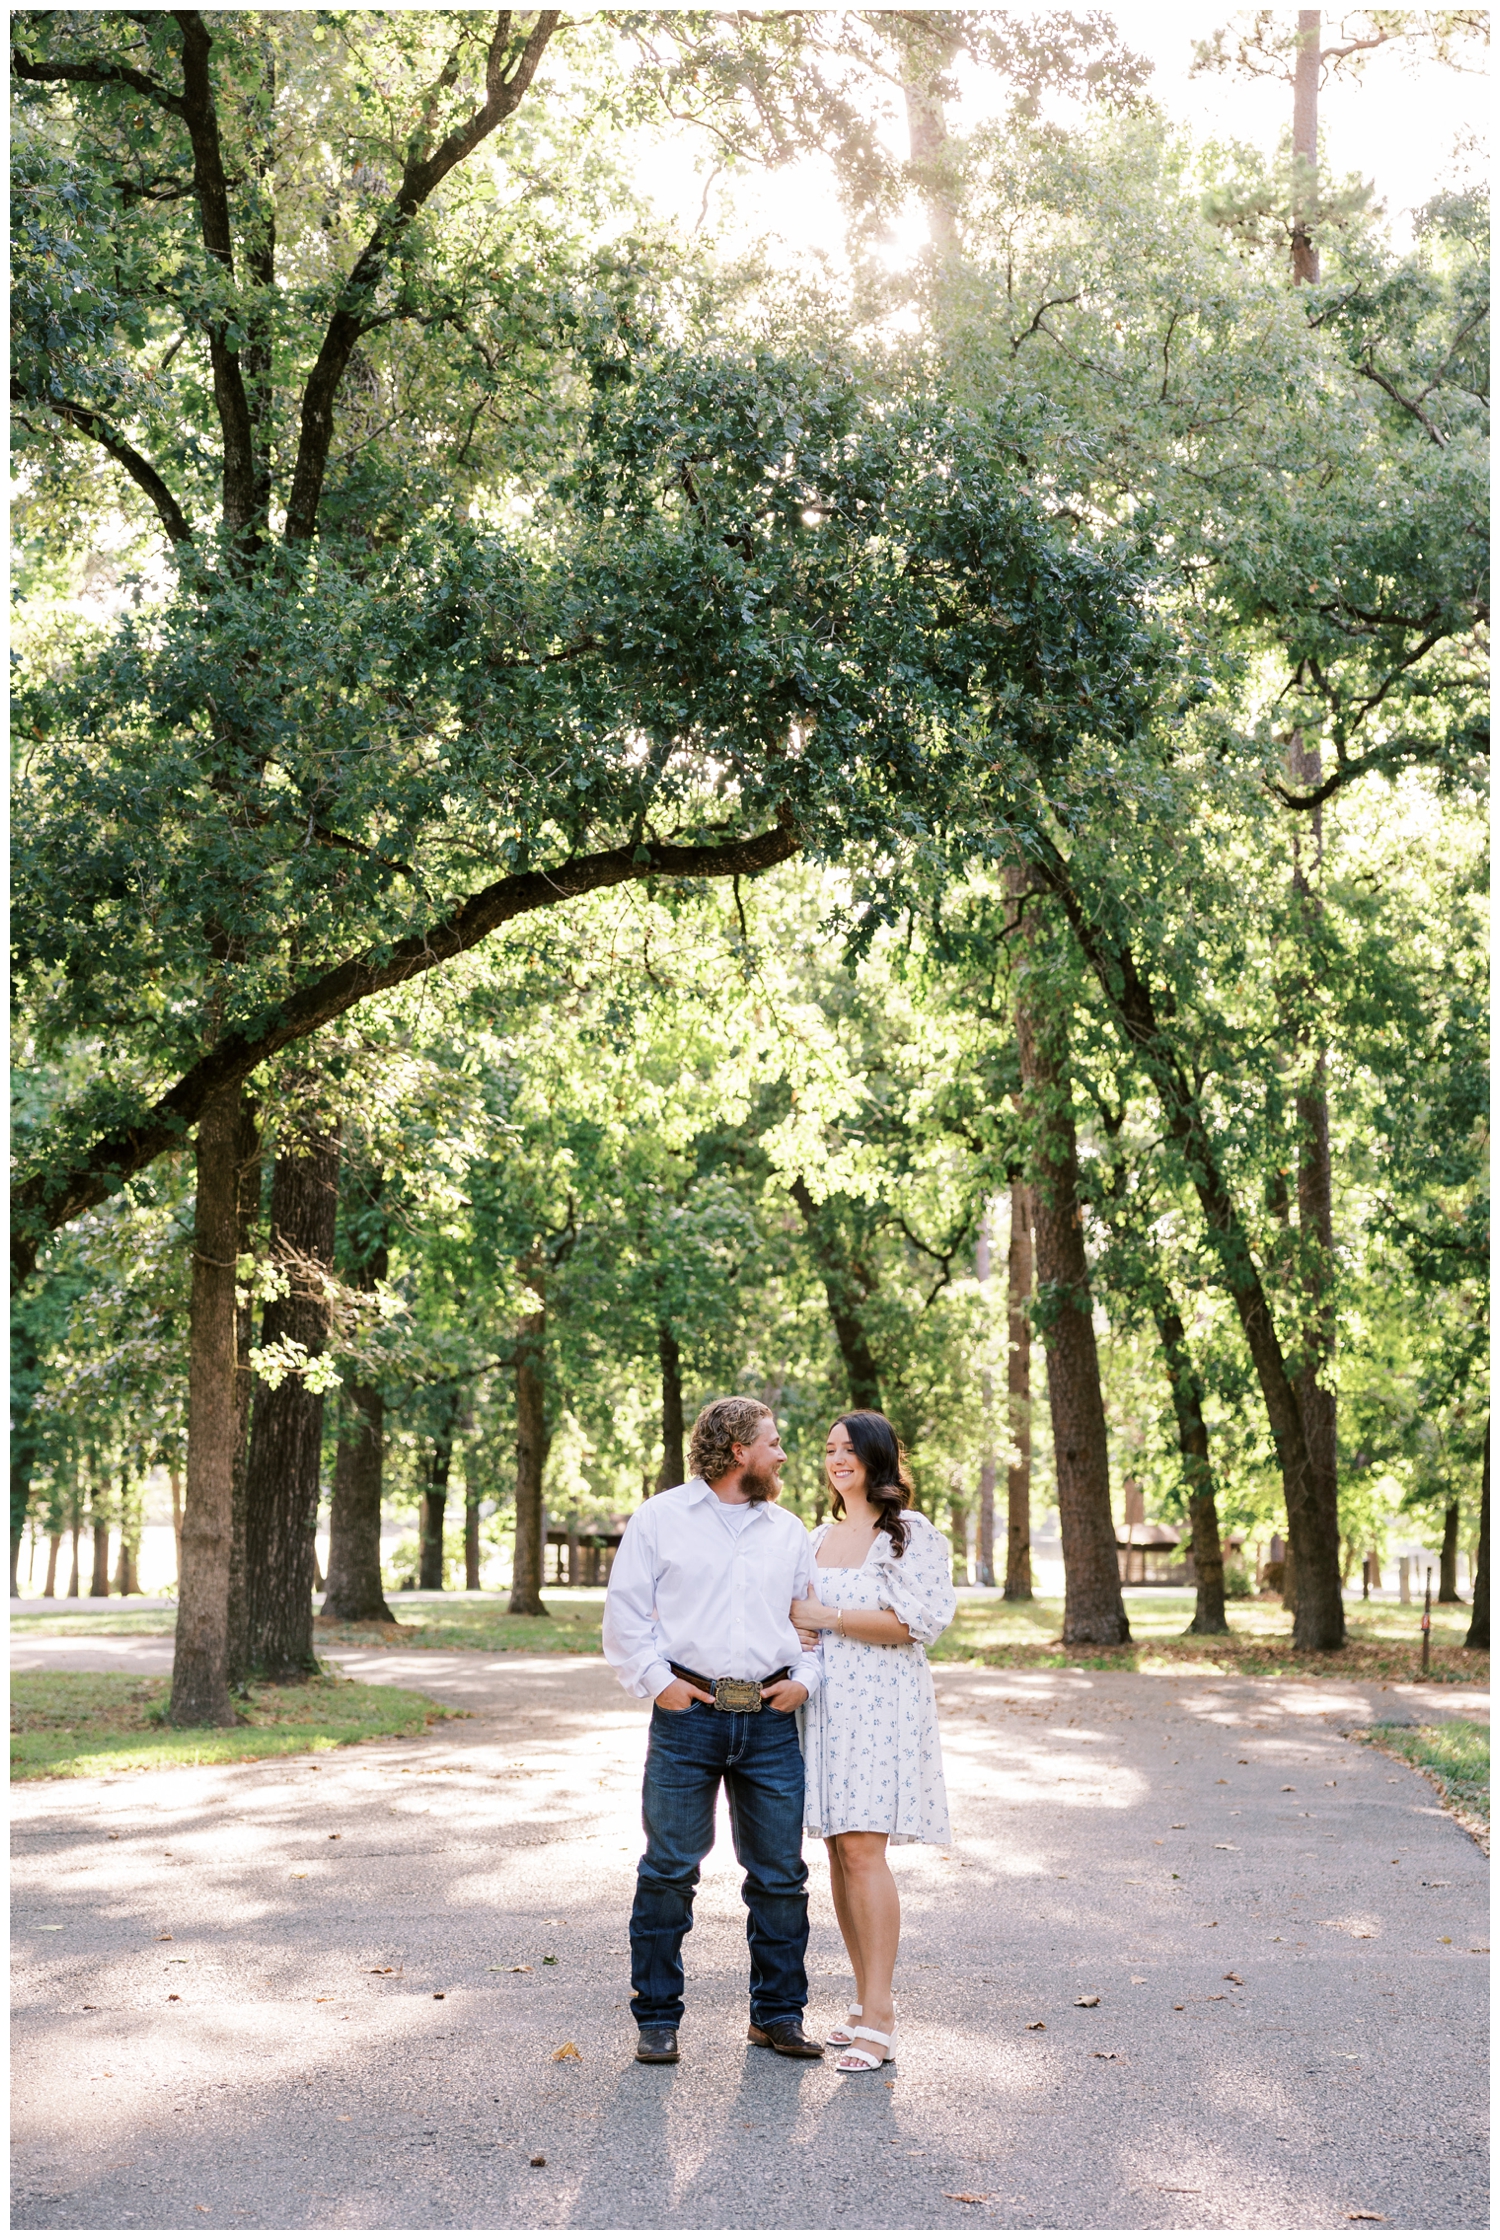 couple in white smiling at each other under trees at a texas park